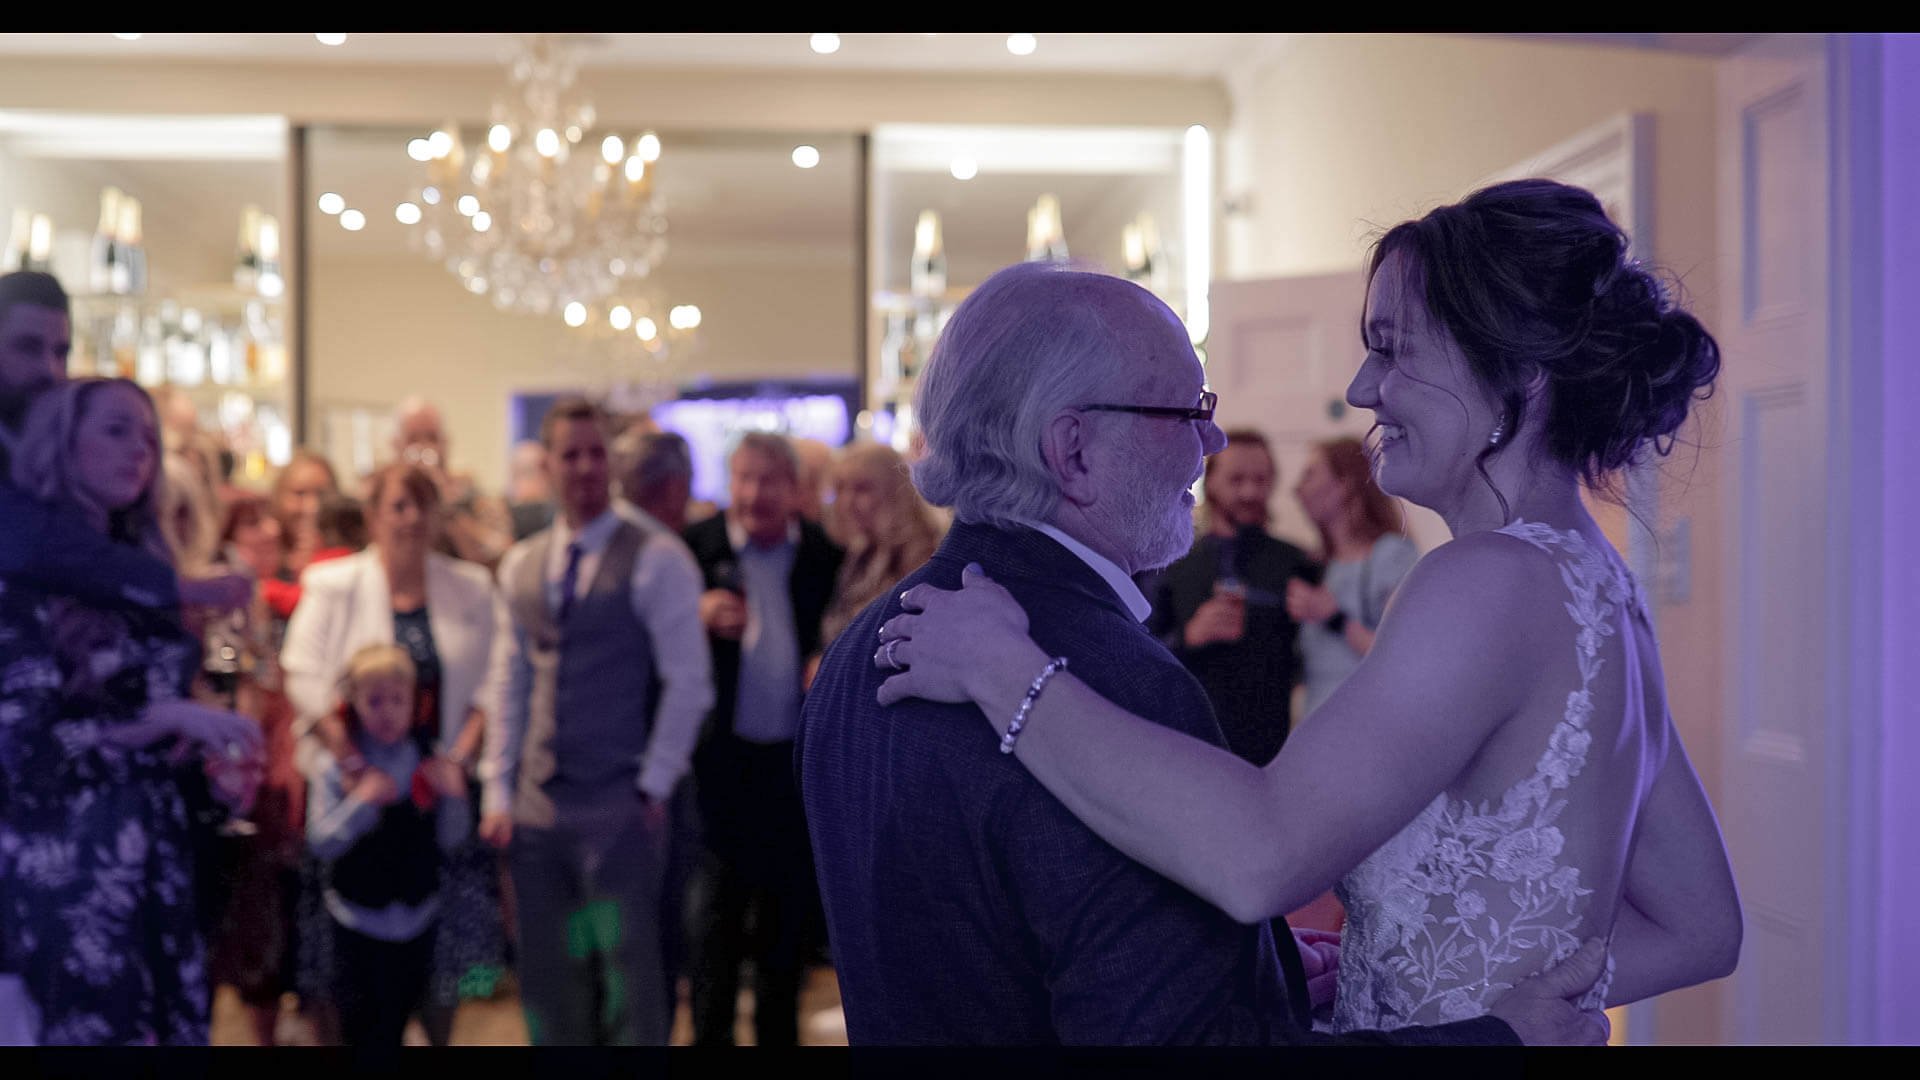 Zayna and her Father hold each other during the Father/Daughter wedding dance in front of the wedding party.